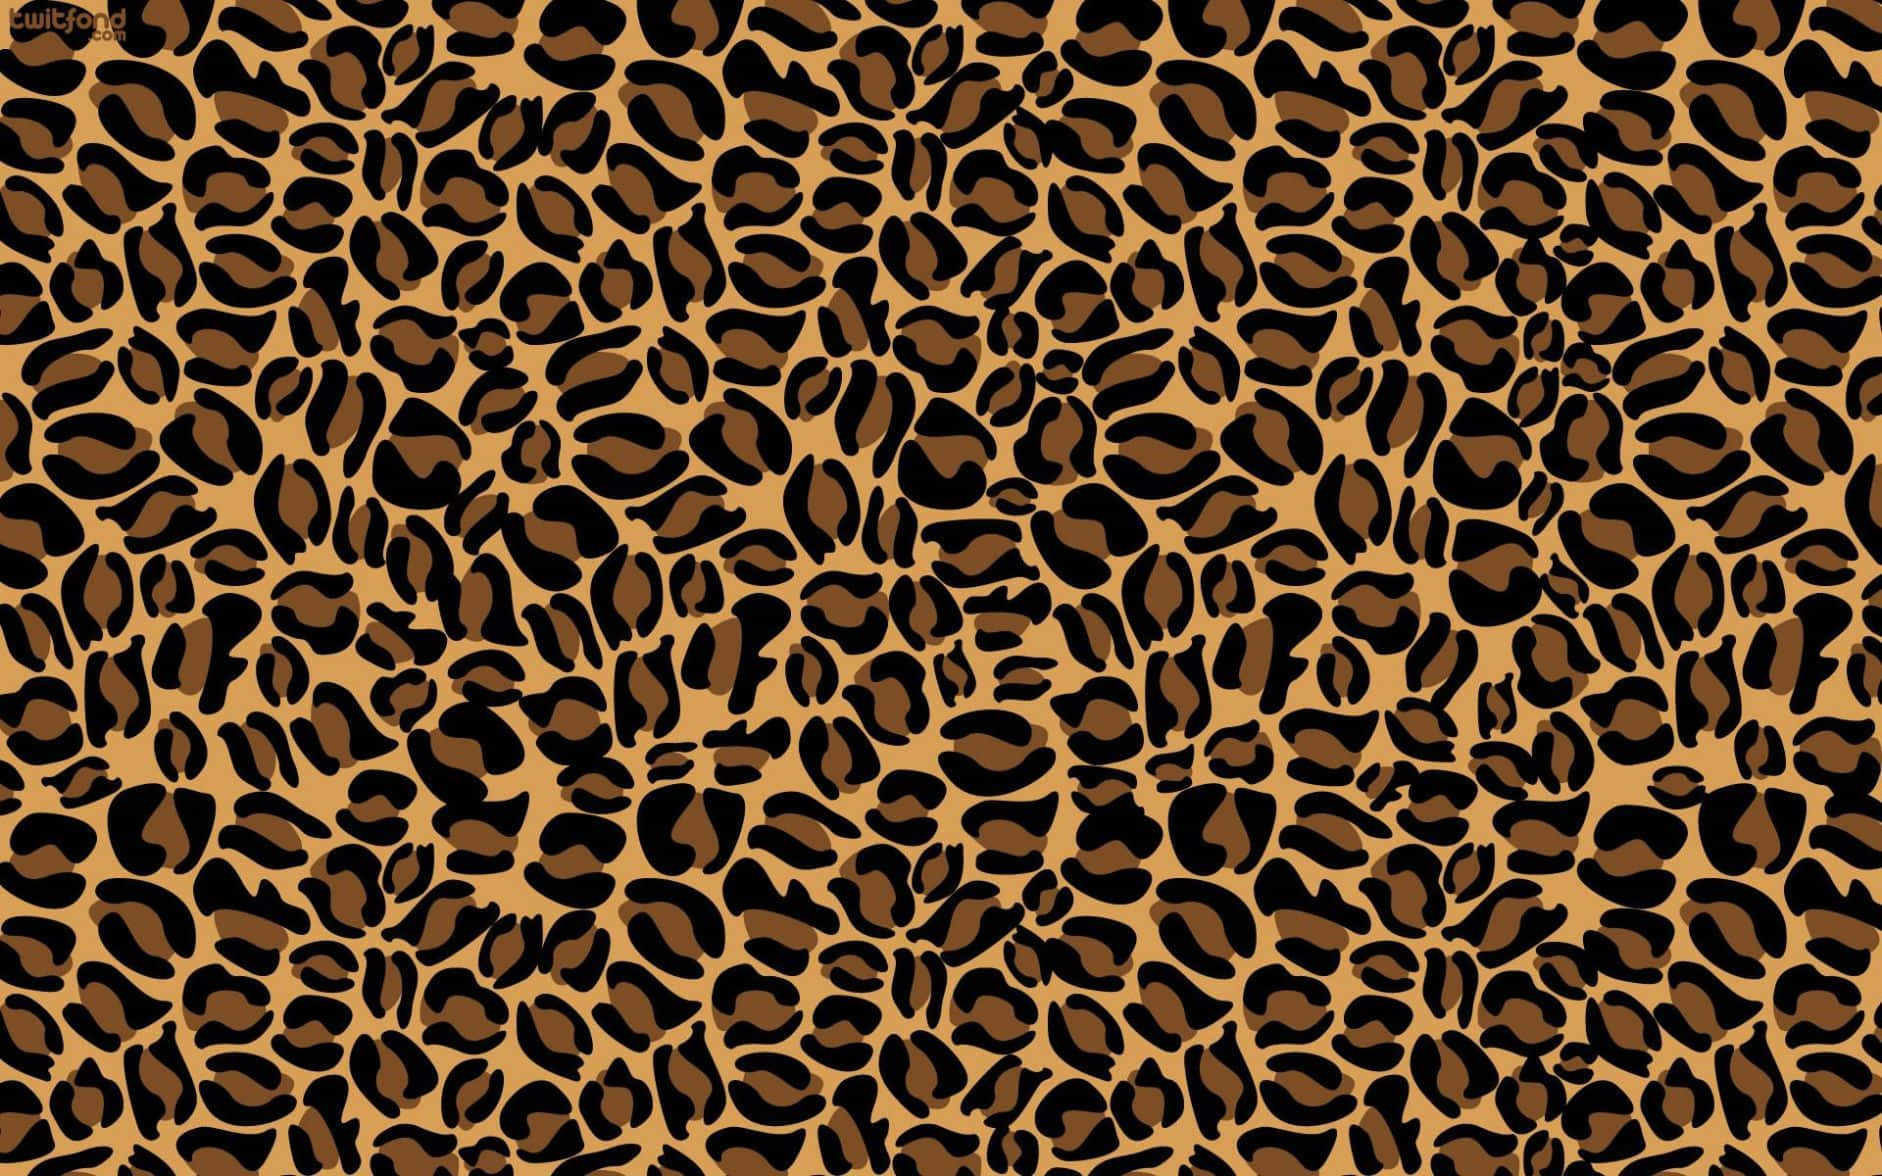 The Bold and Unique Leopard Pattern Wallpaper